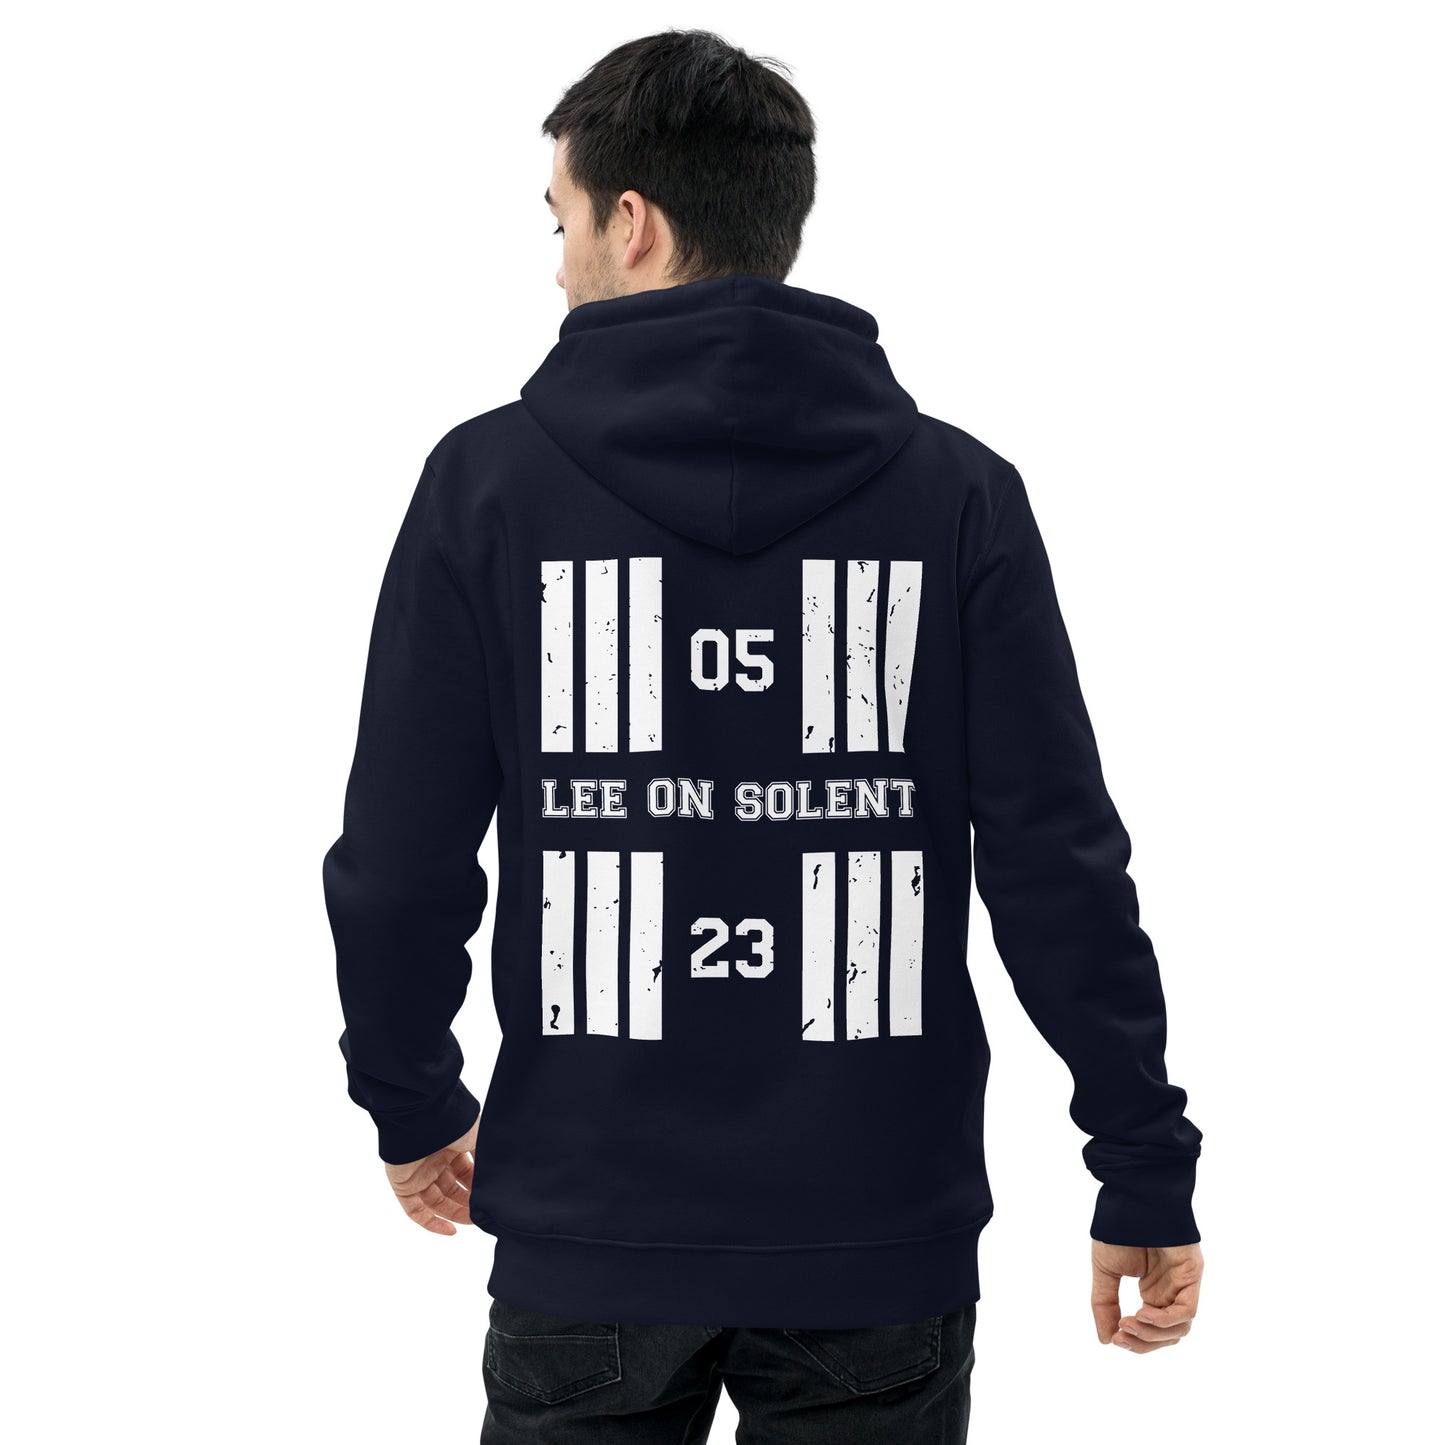 Coloured in navy the Lee on Solent Airfield Designator heavyweight hoodie features a discreet collegiate print on the front with a bold print featuring the airport's name and designator, framed by stylised distressed threshold markings on the back.